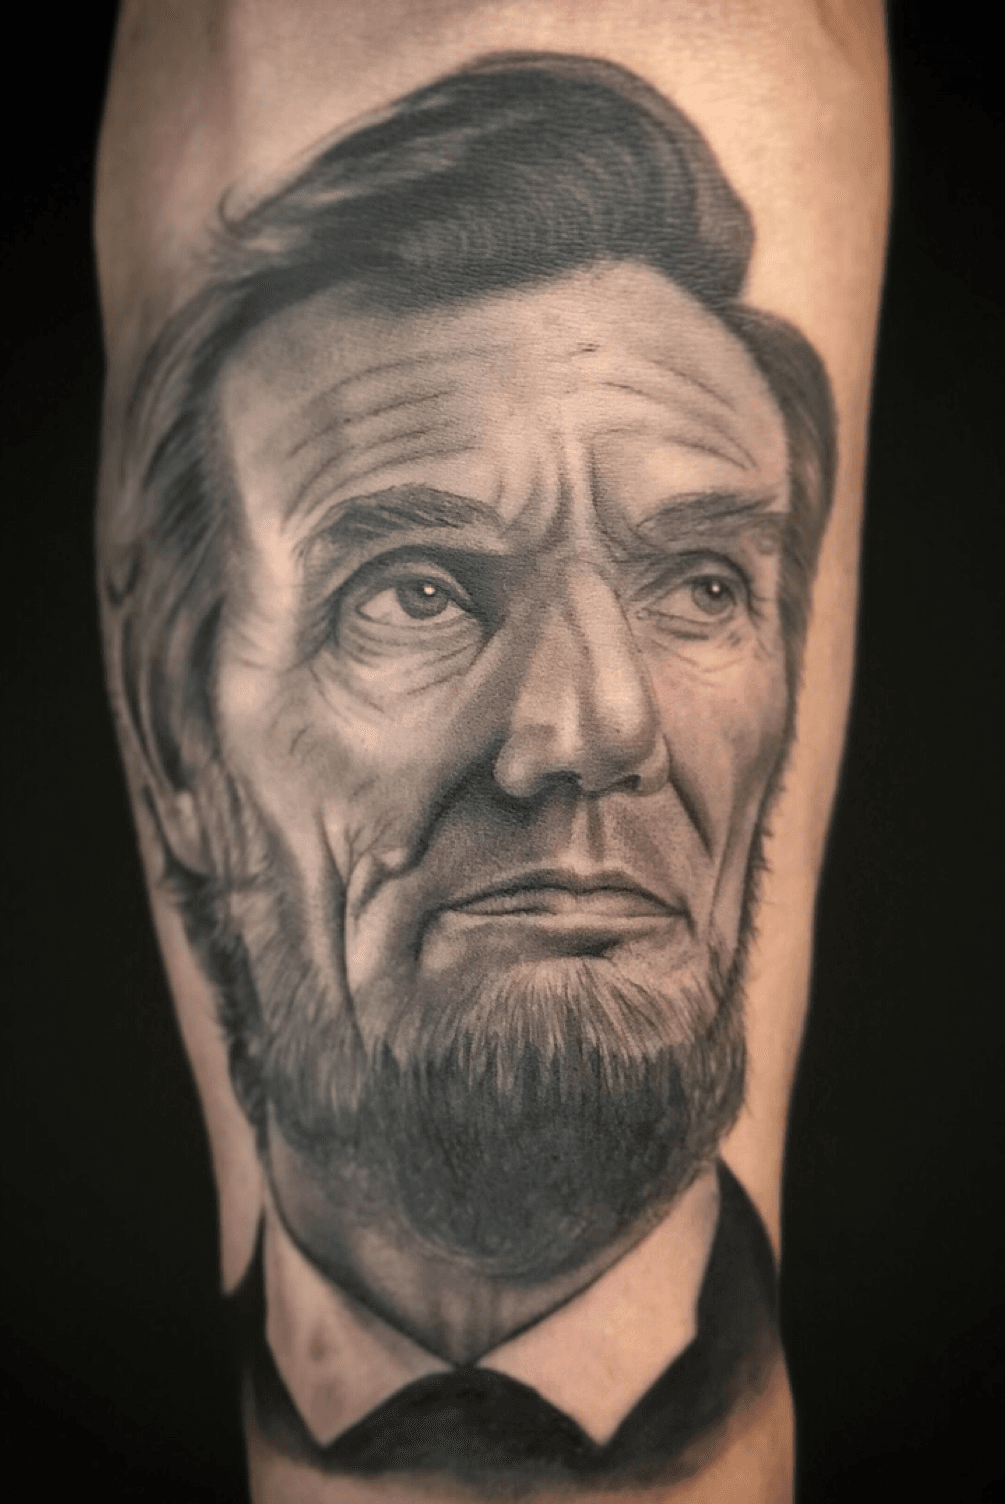 Halloween is in just a few days so a zombie Abraham Lincoln seems perfect  This was fun austindublois9  ryanthompsonta  Zombie tattoos Tattoos  Leg tattoos